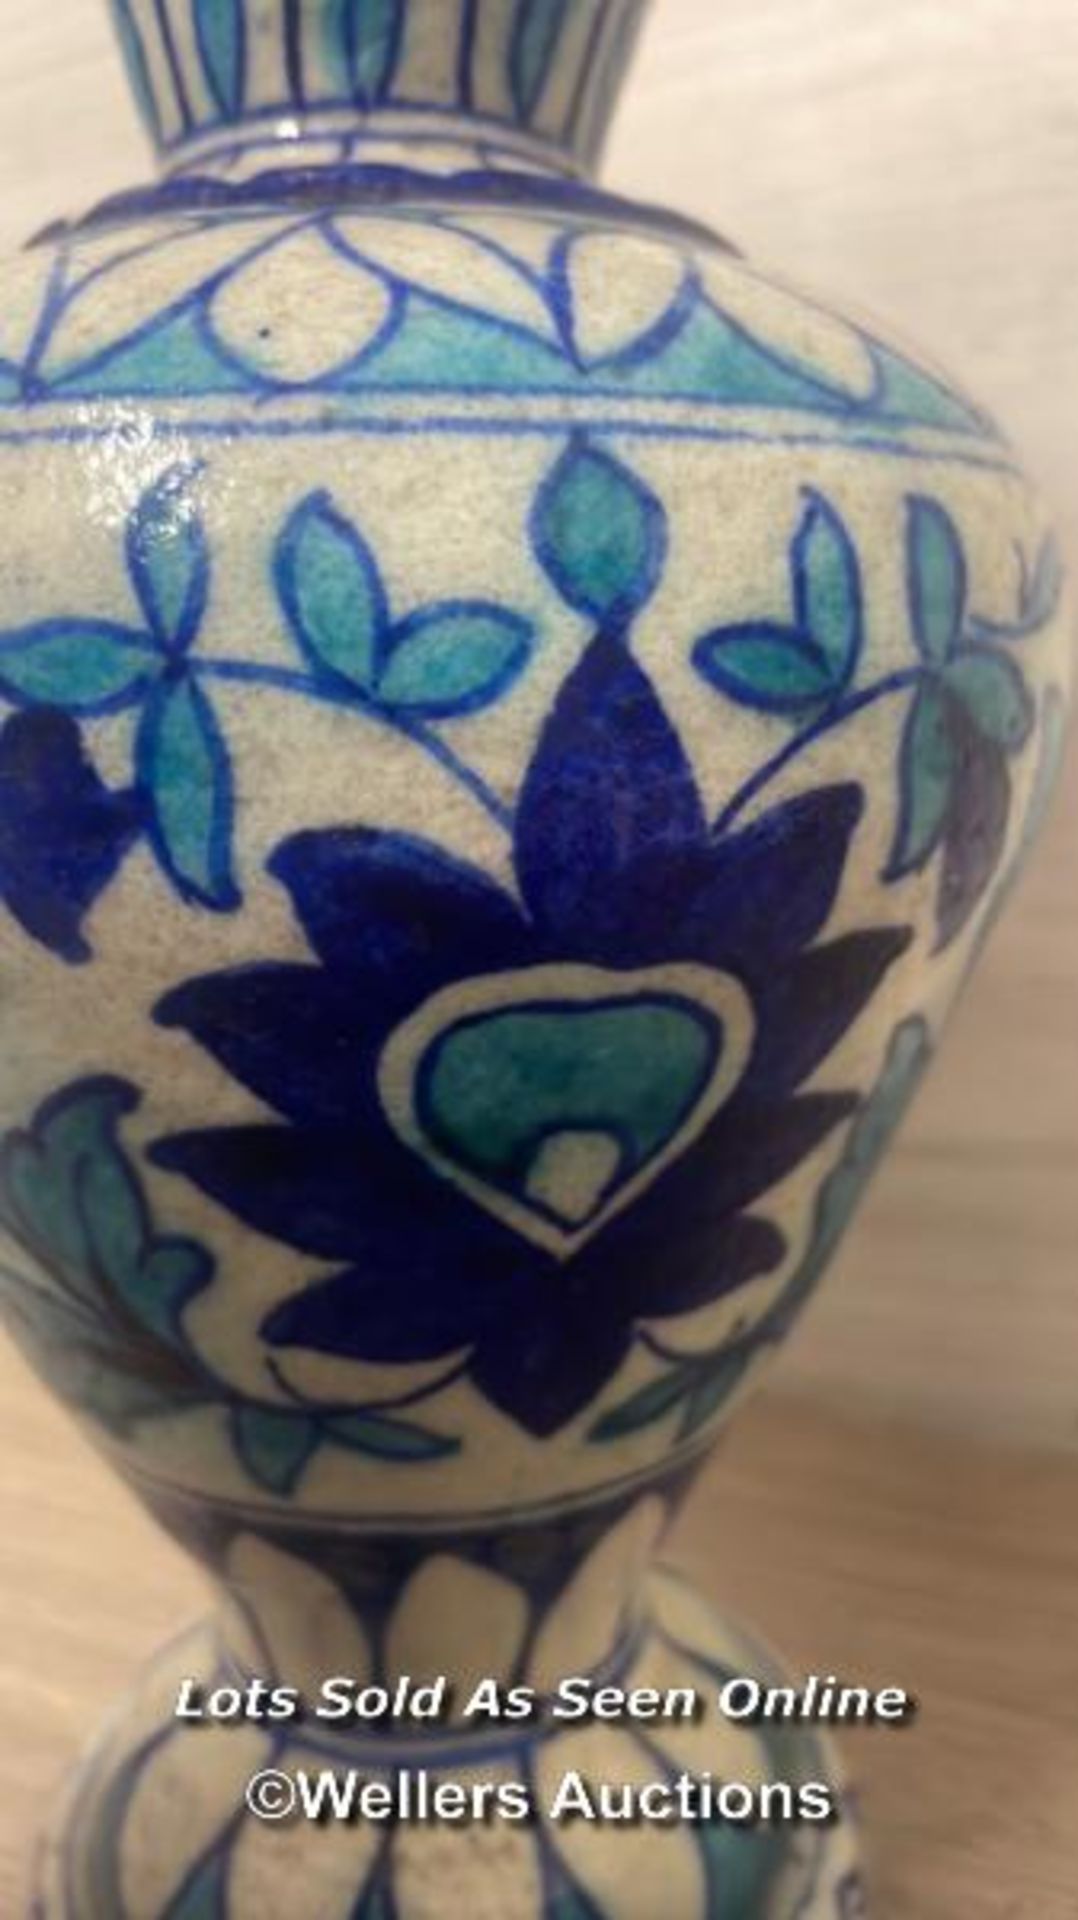 TWO SIMILAR MULTAN POTTERY VASES FROM PAKISTAN, HAND PAINTED BLUE & TURQUOISE FOLIAGE AND FLOWER - Bild 11 aus 15